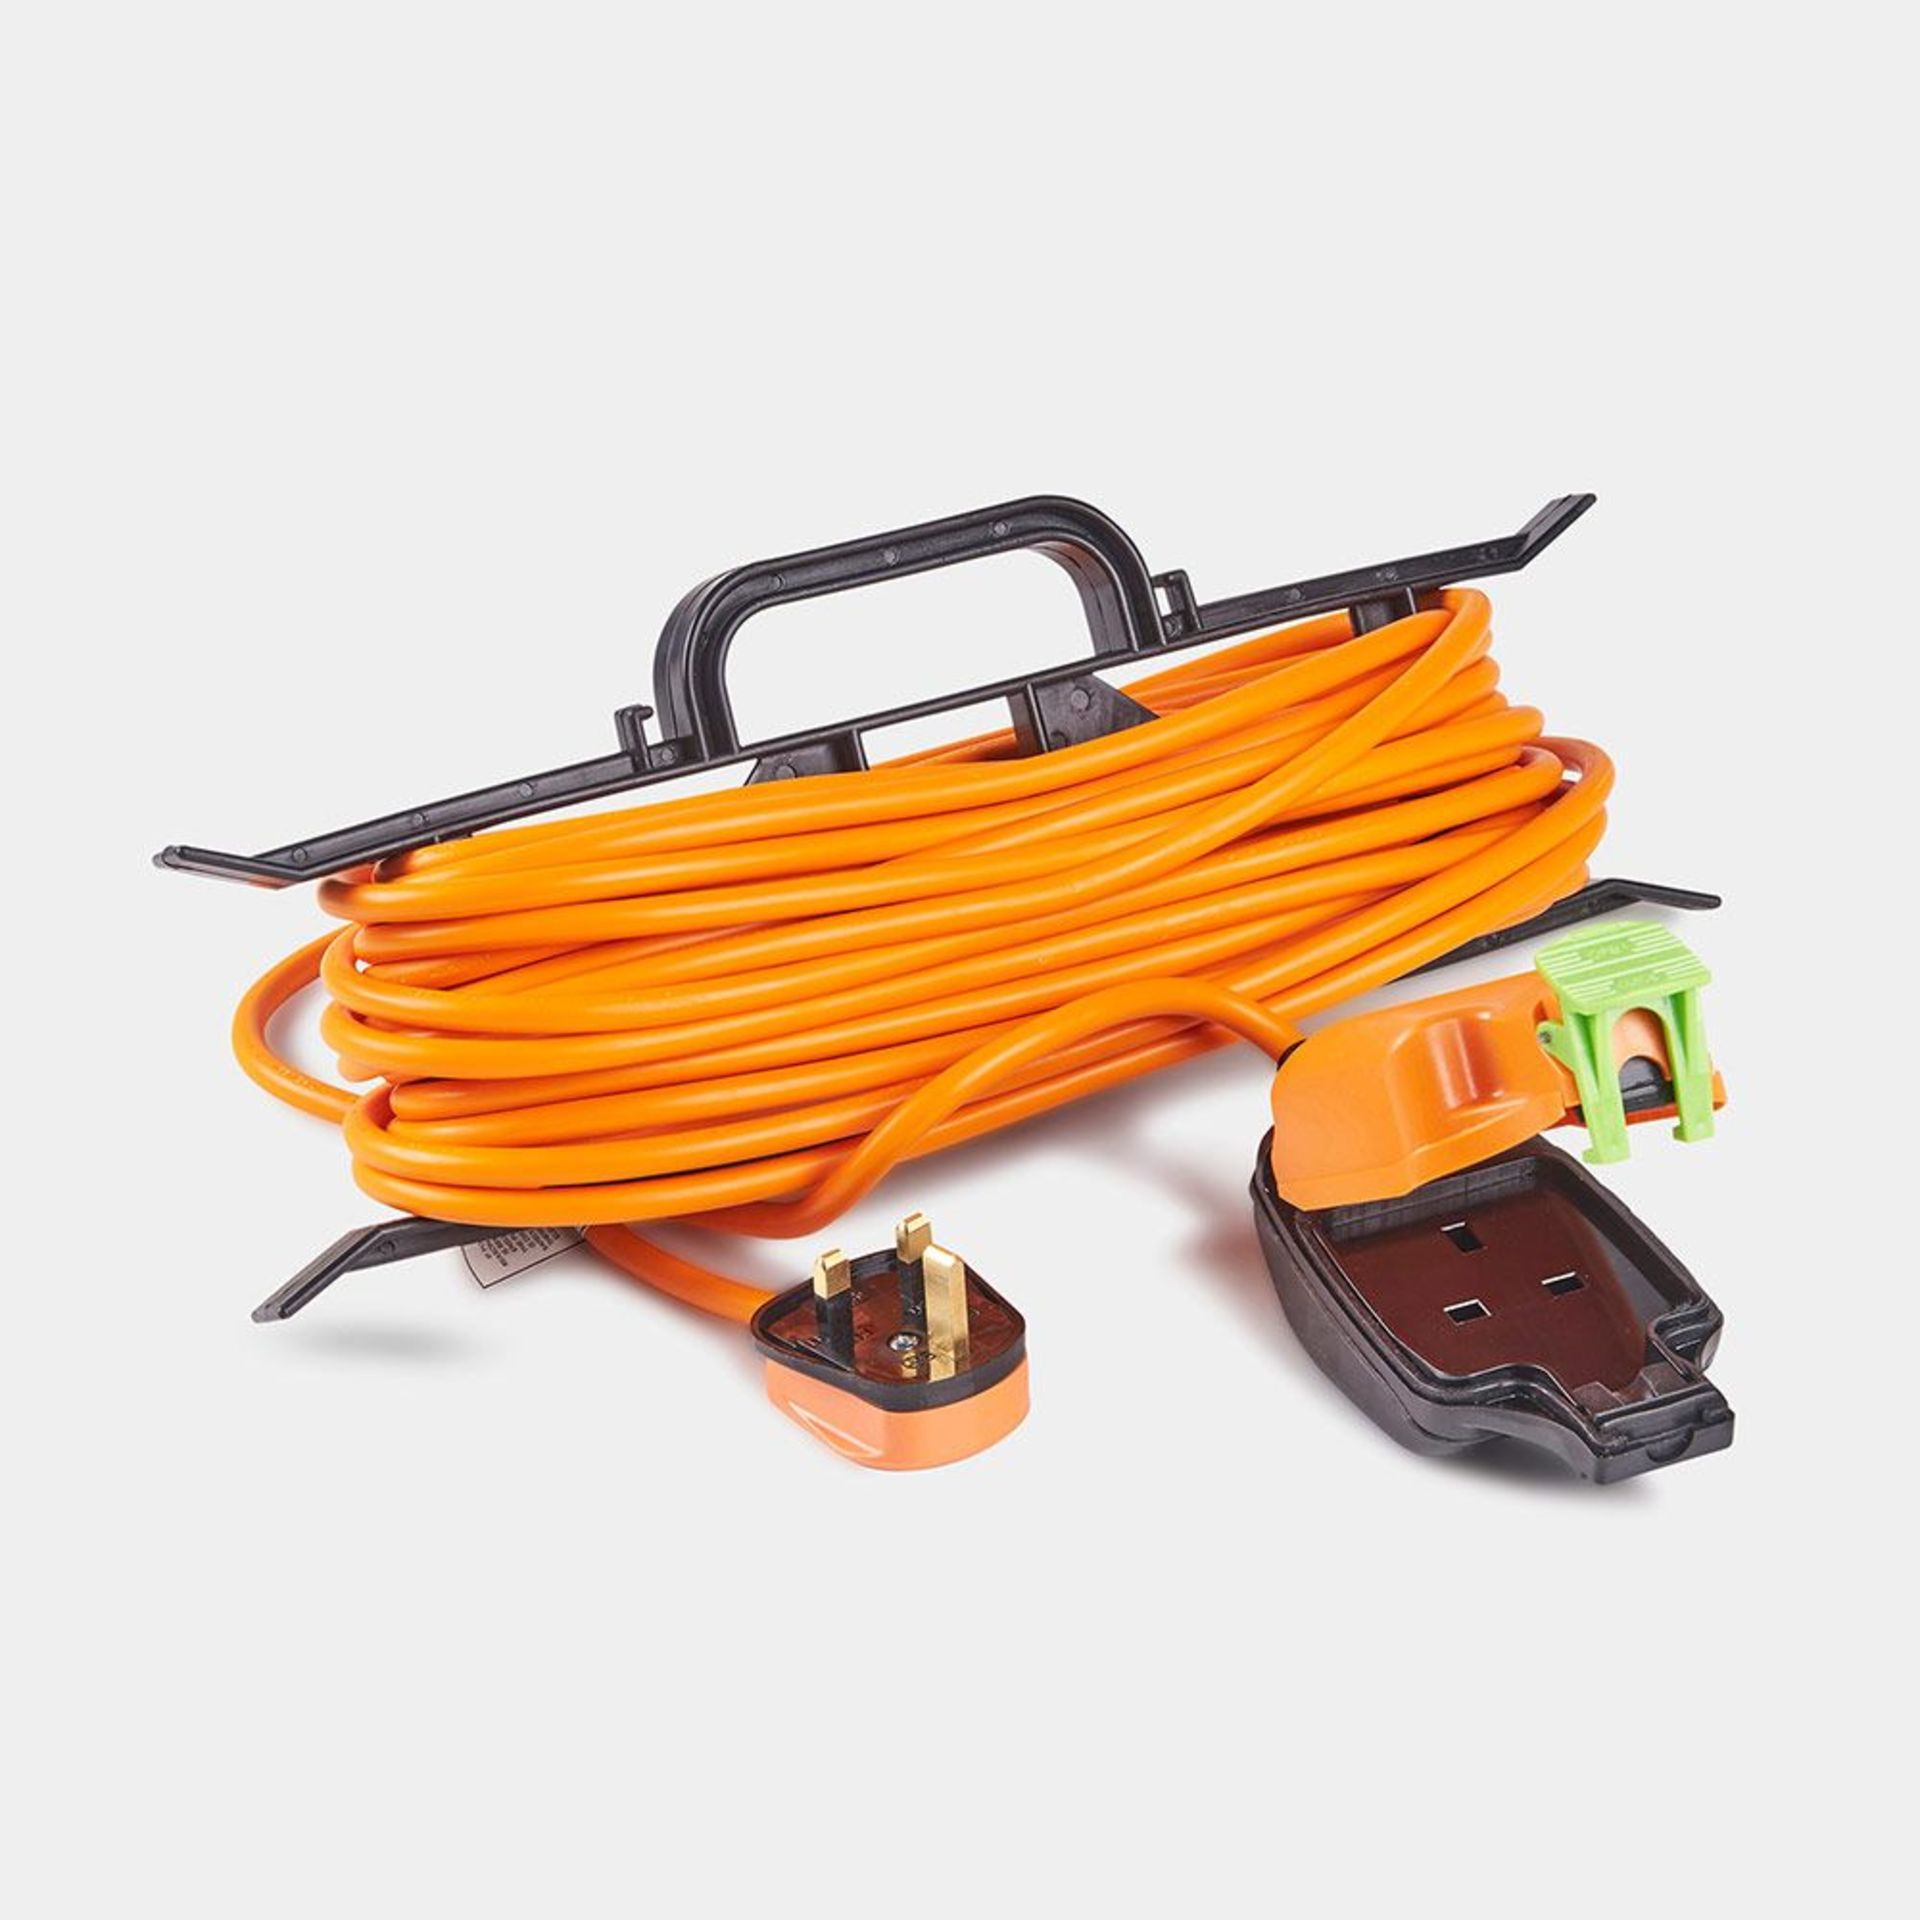 15m Splash-Proof Extension Lead. - BI. Designed for tidy storage, the quality 15-metre cable is